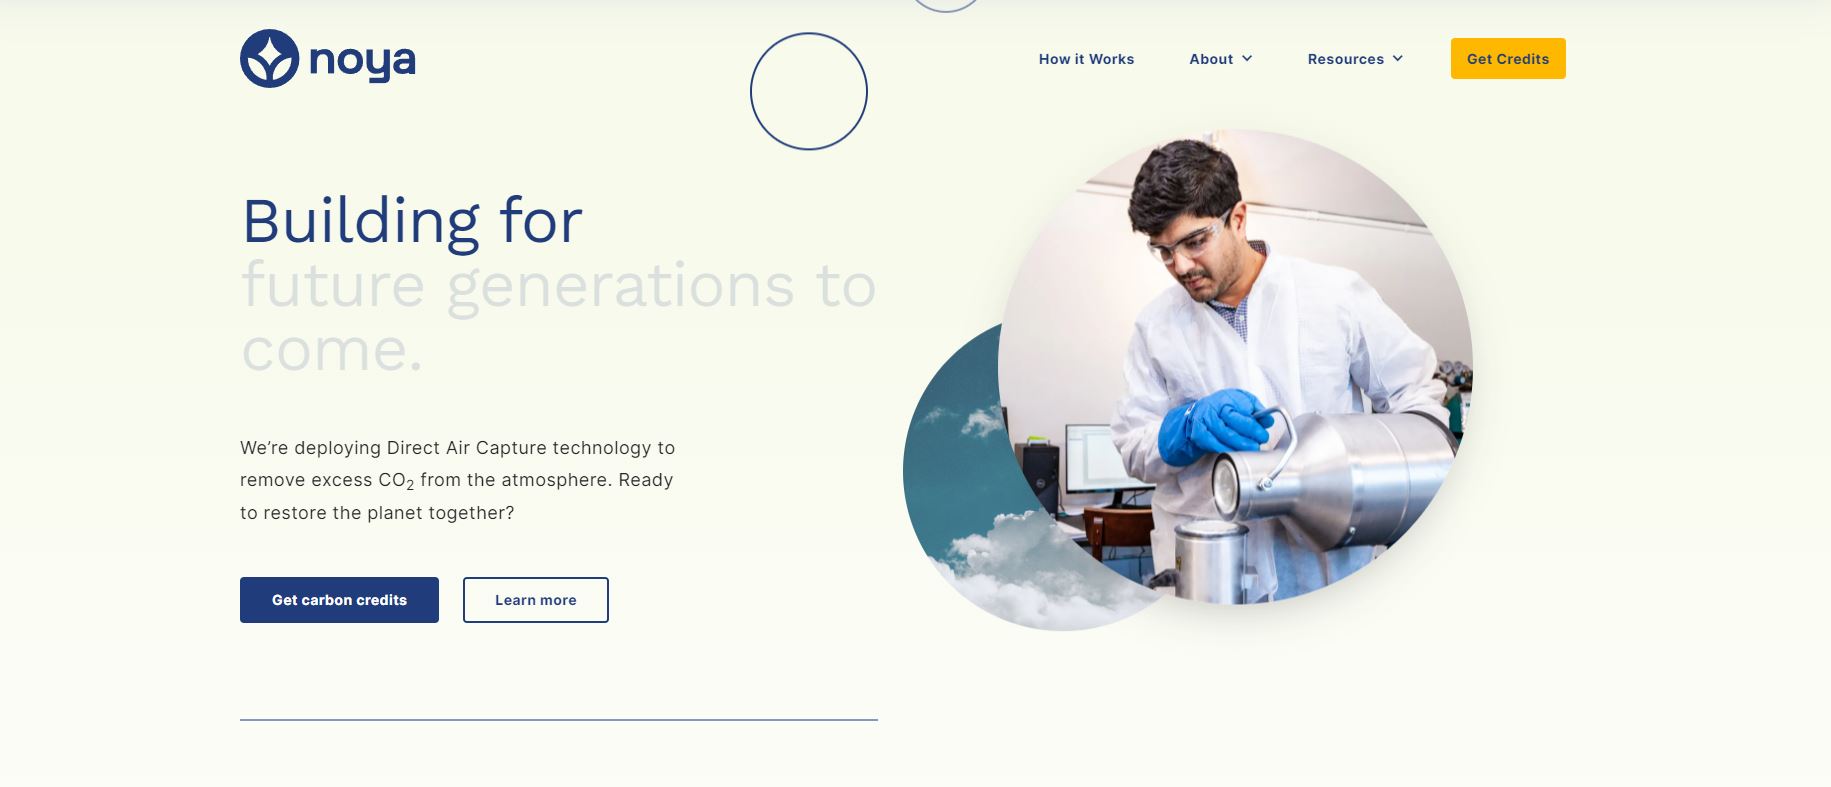 Noya has raised a total of $11M in Series A funding from notable investors